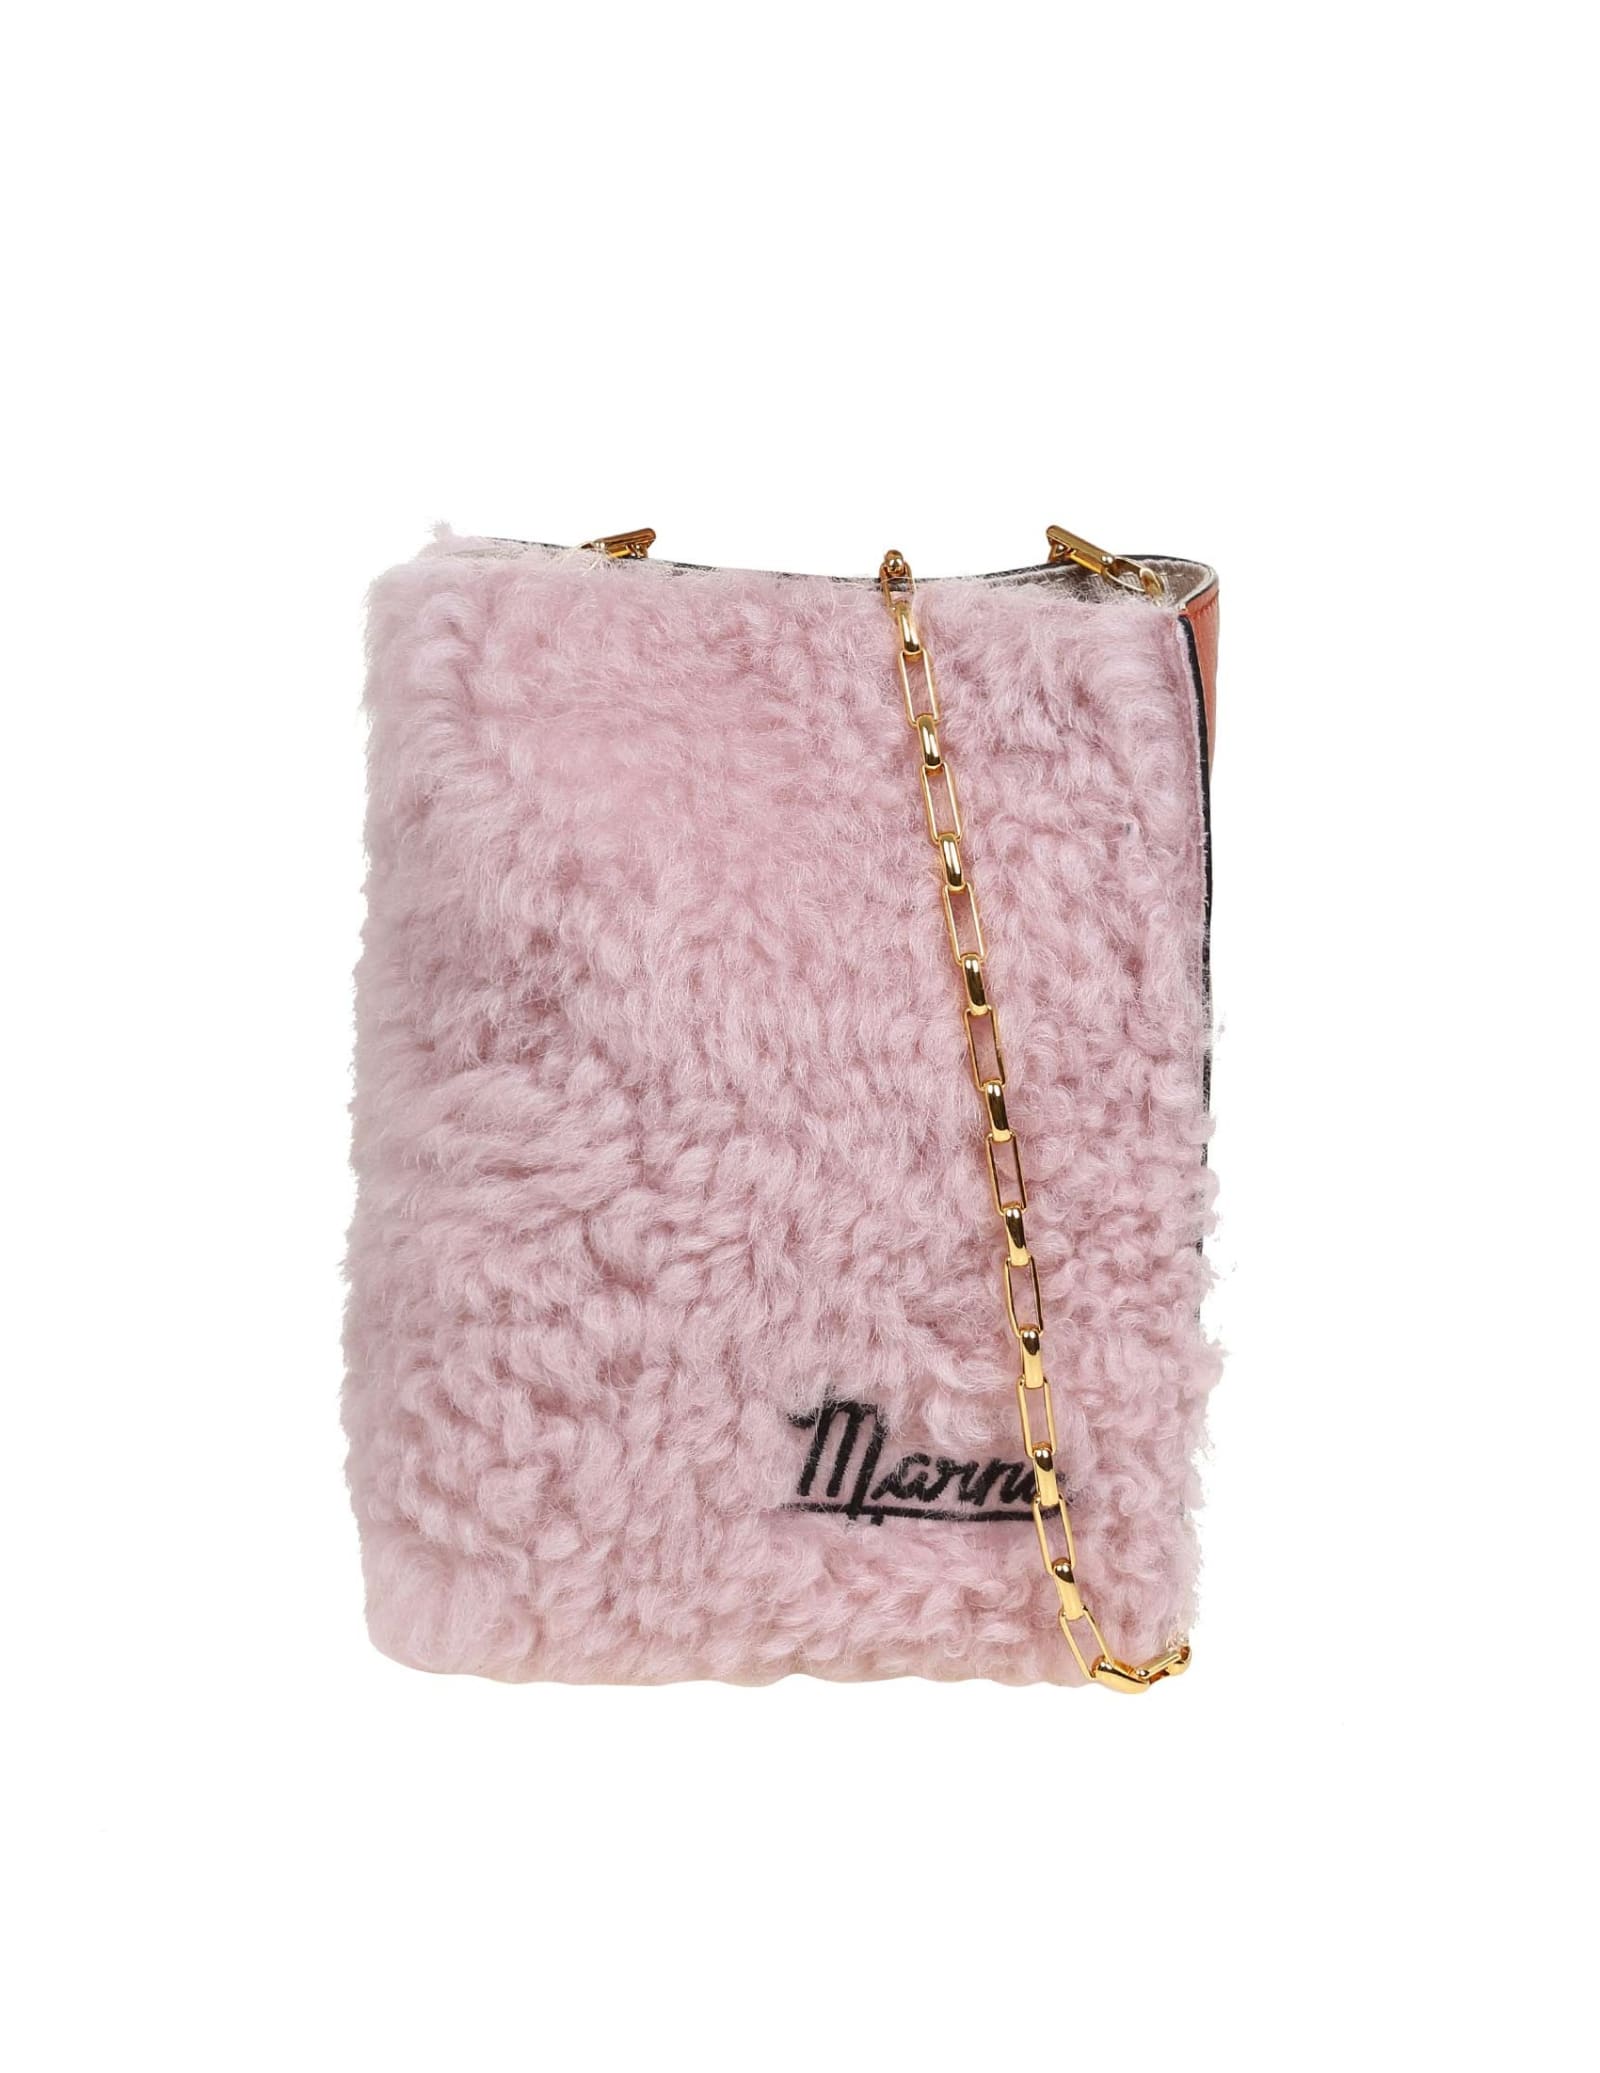 Marni Museo Soft Shoulder Bag In Leather And Sheepskin